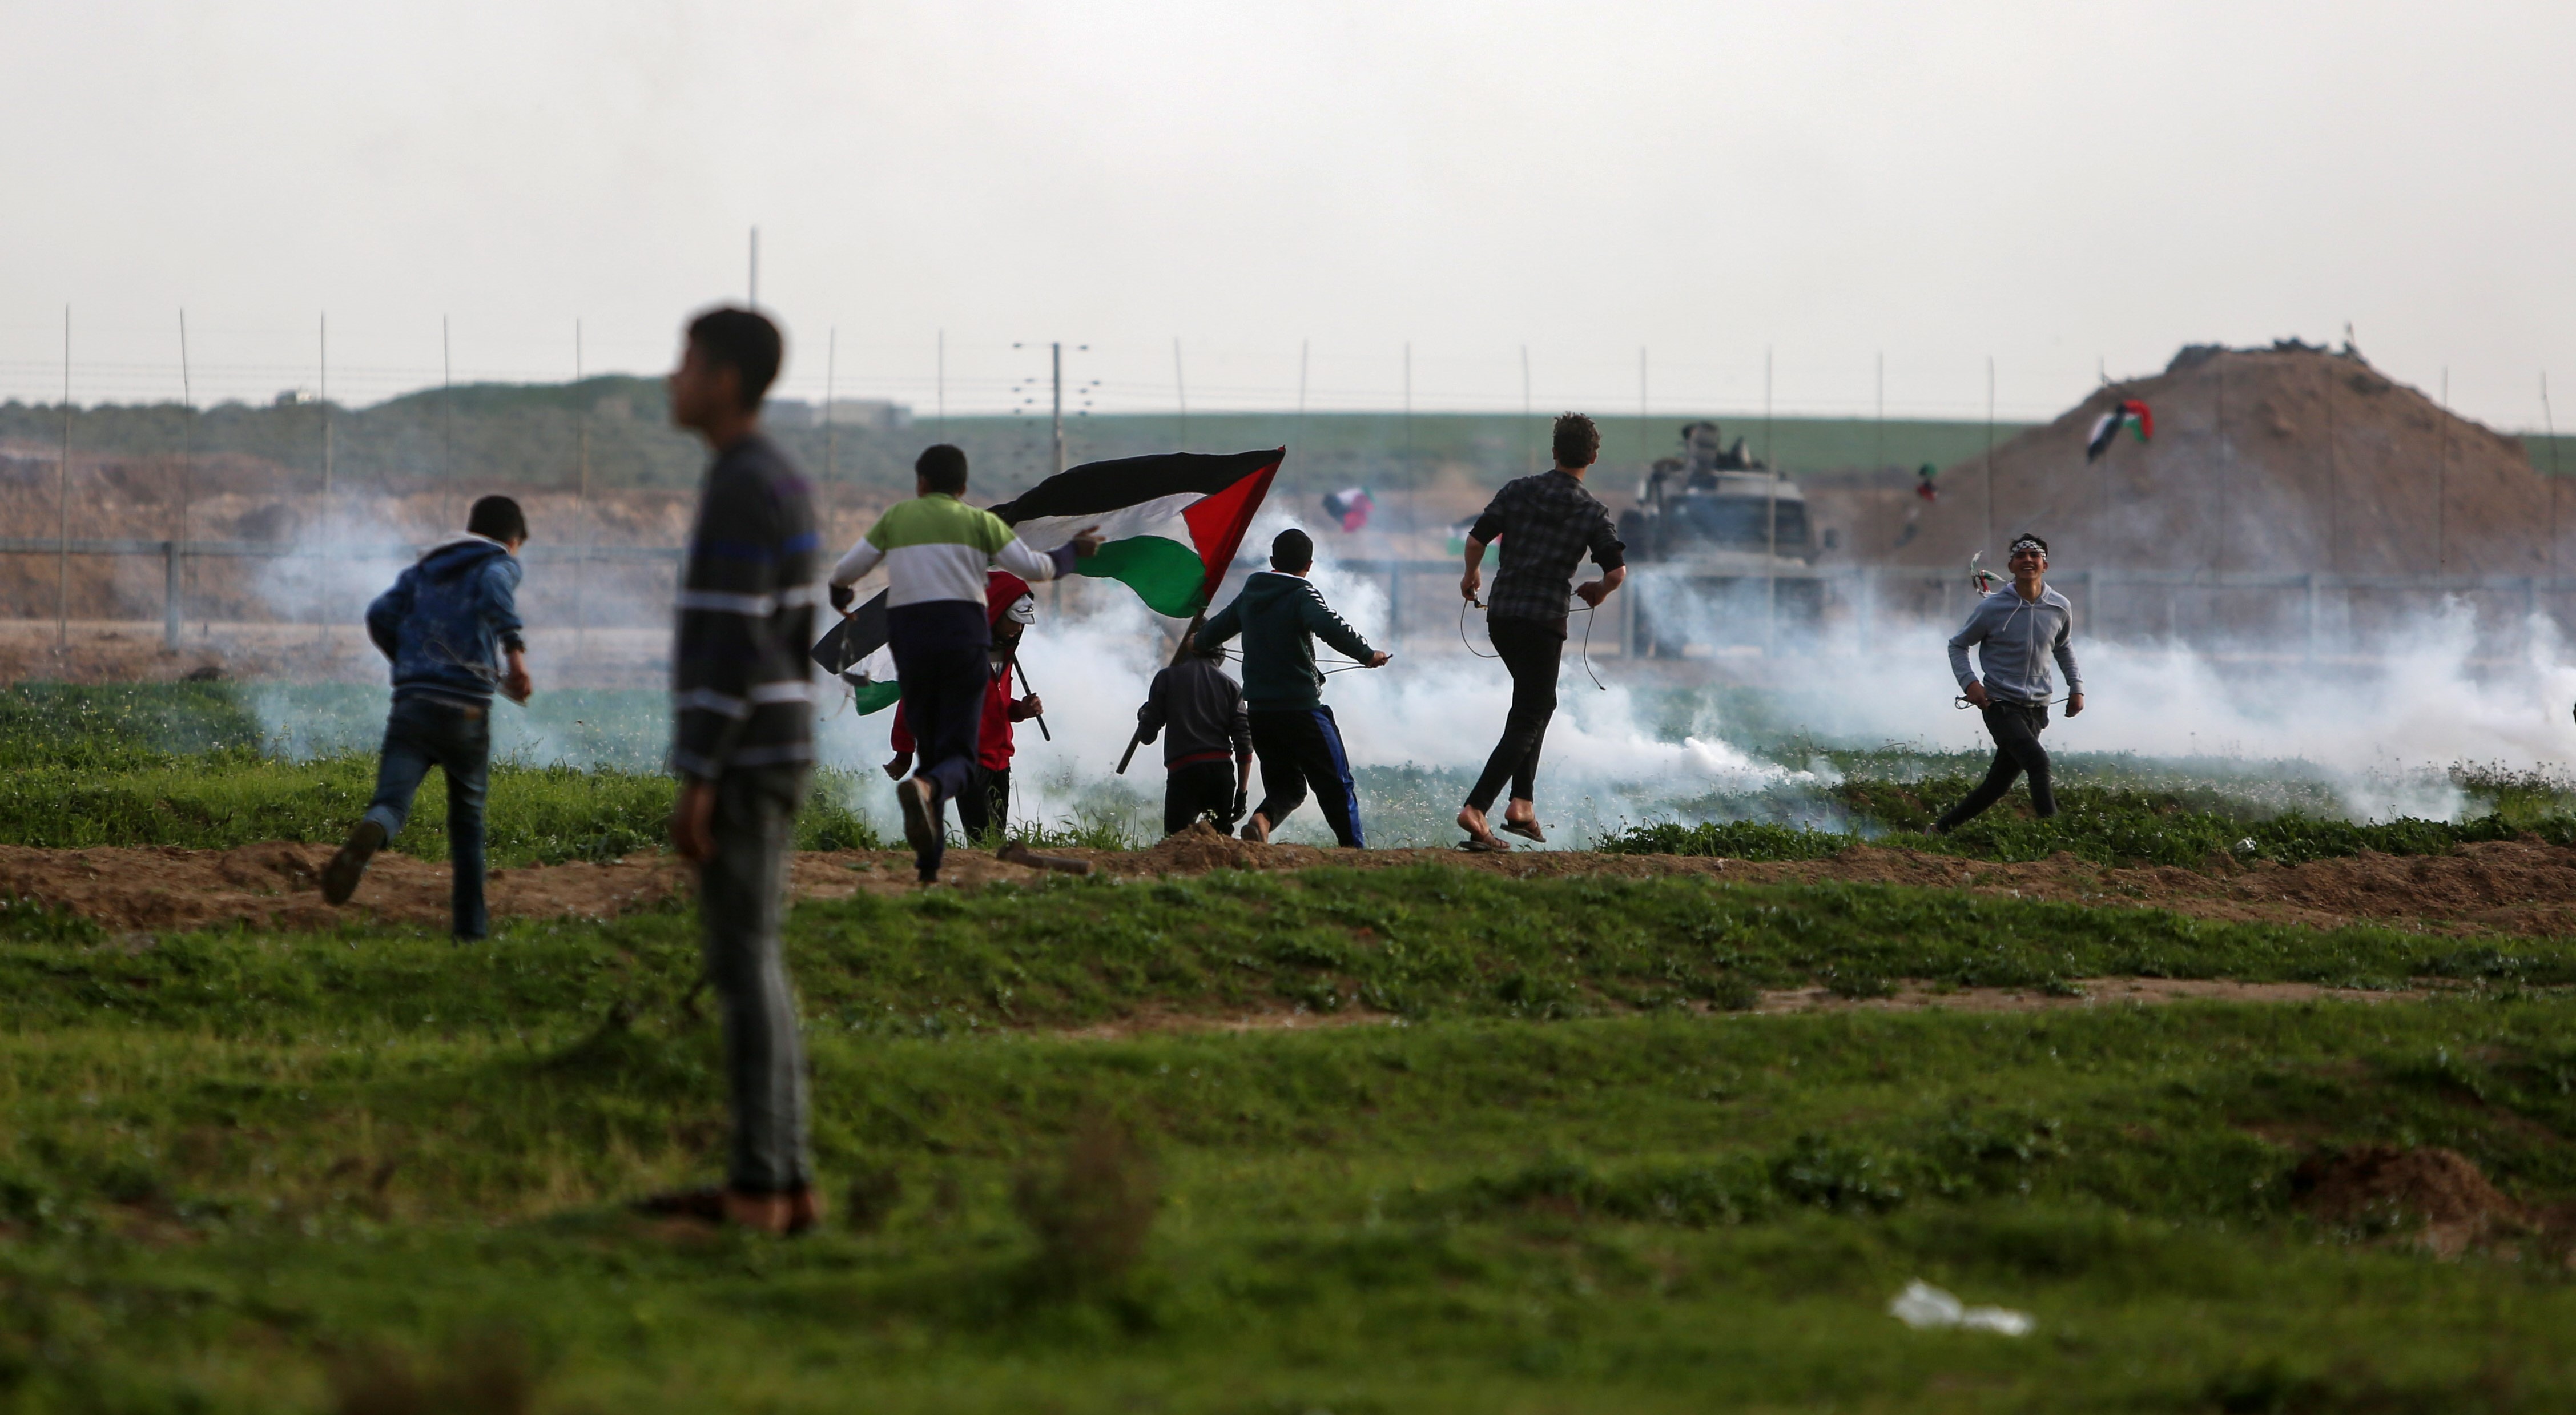 One fatally shot, 42 wounded during weekly Gaza protest